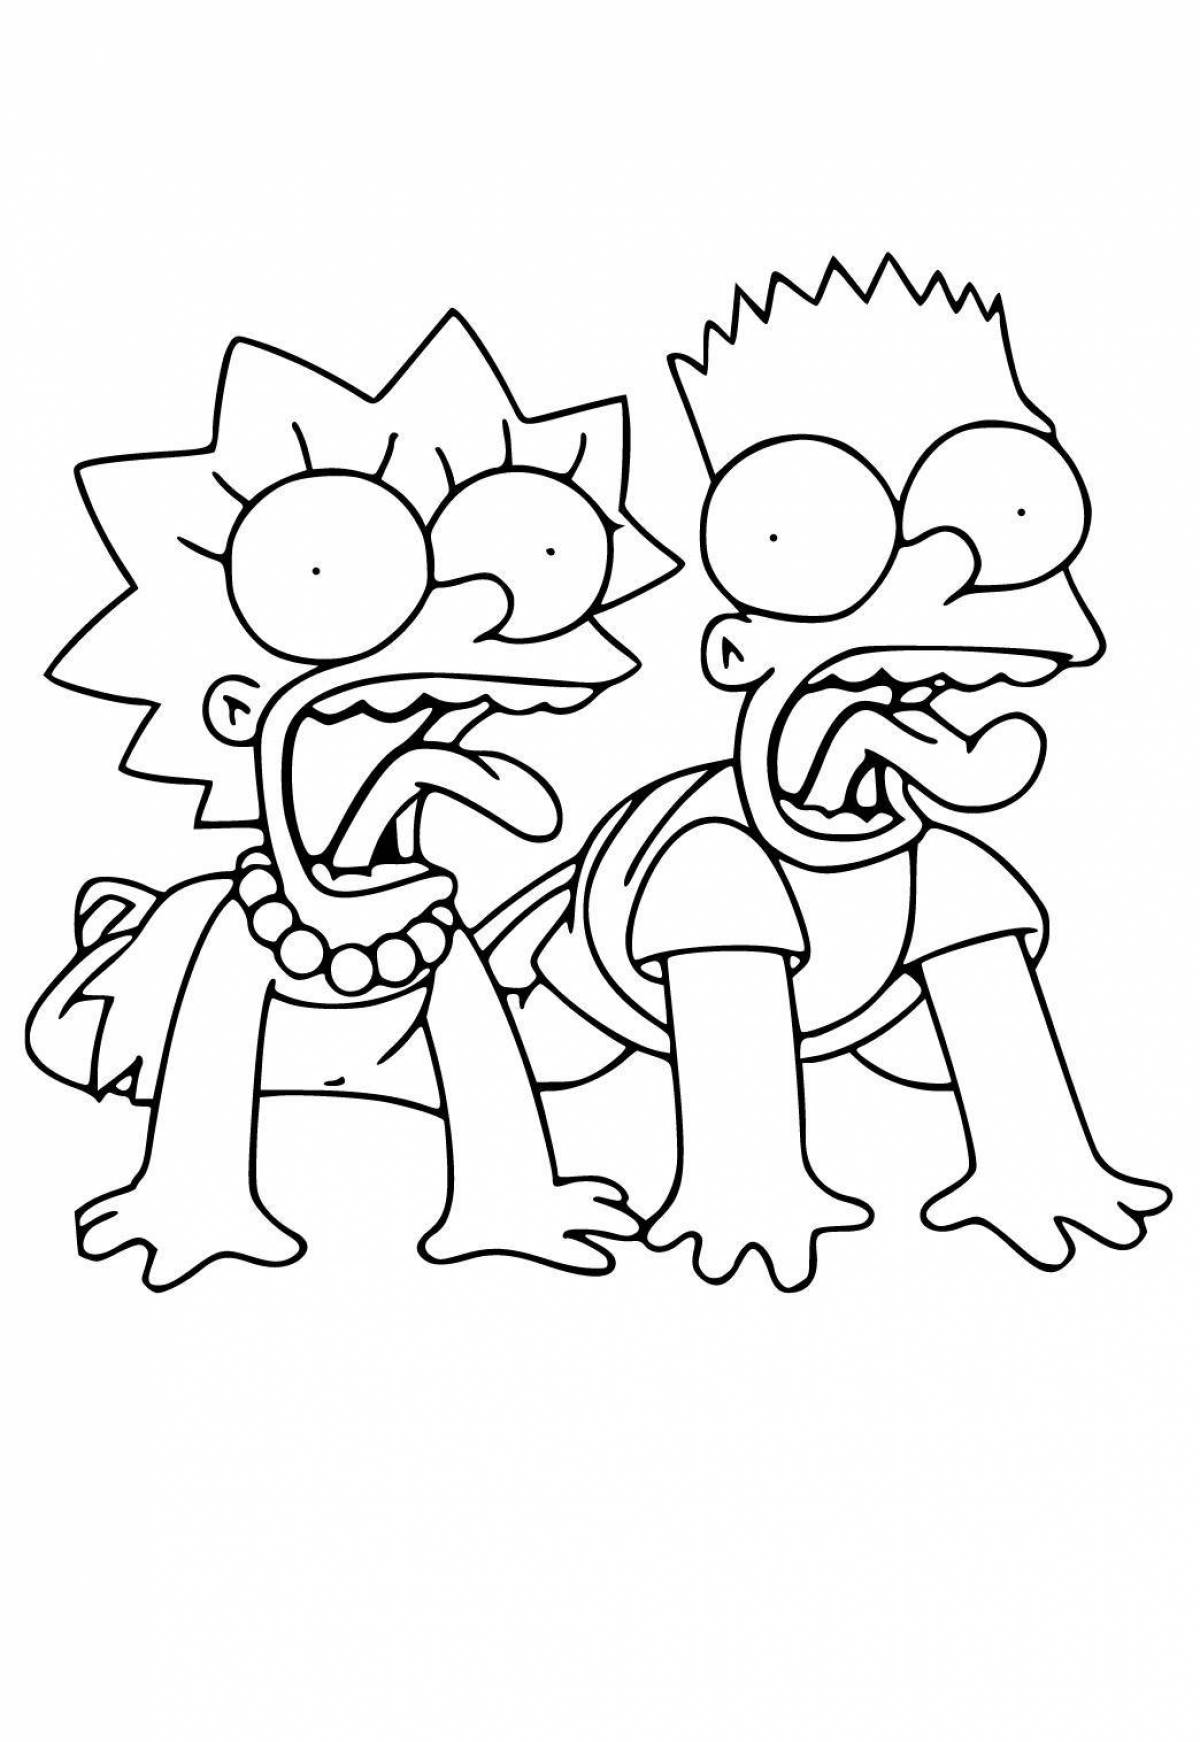 Colourful lisa simpson coloring book